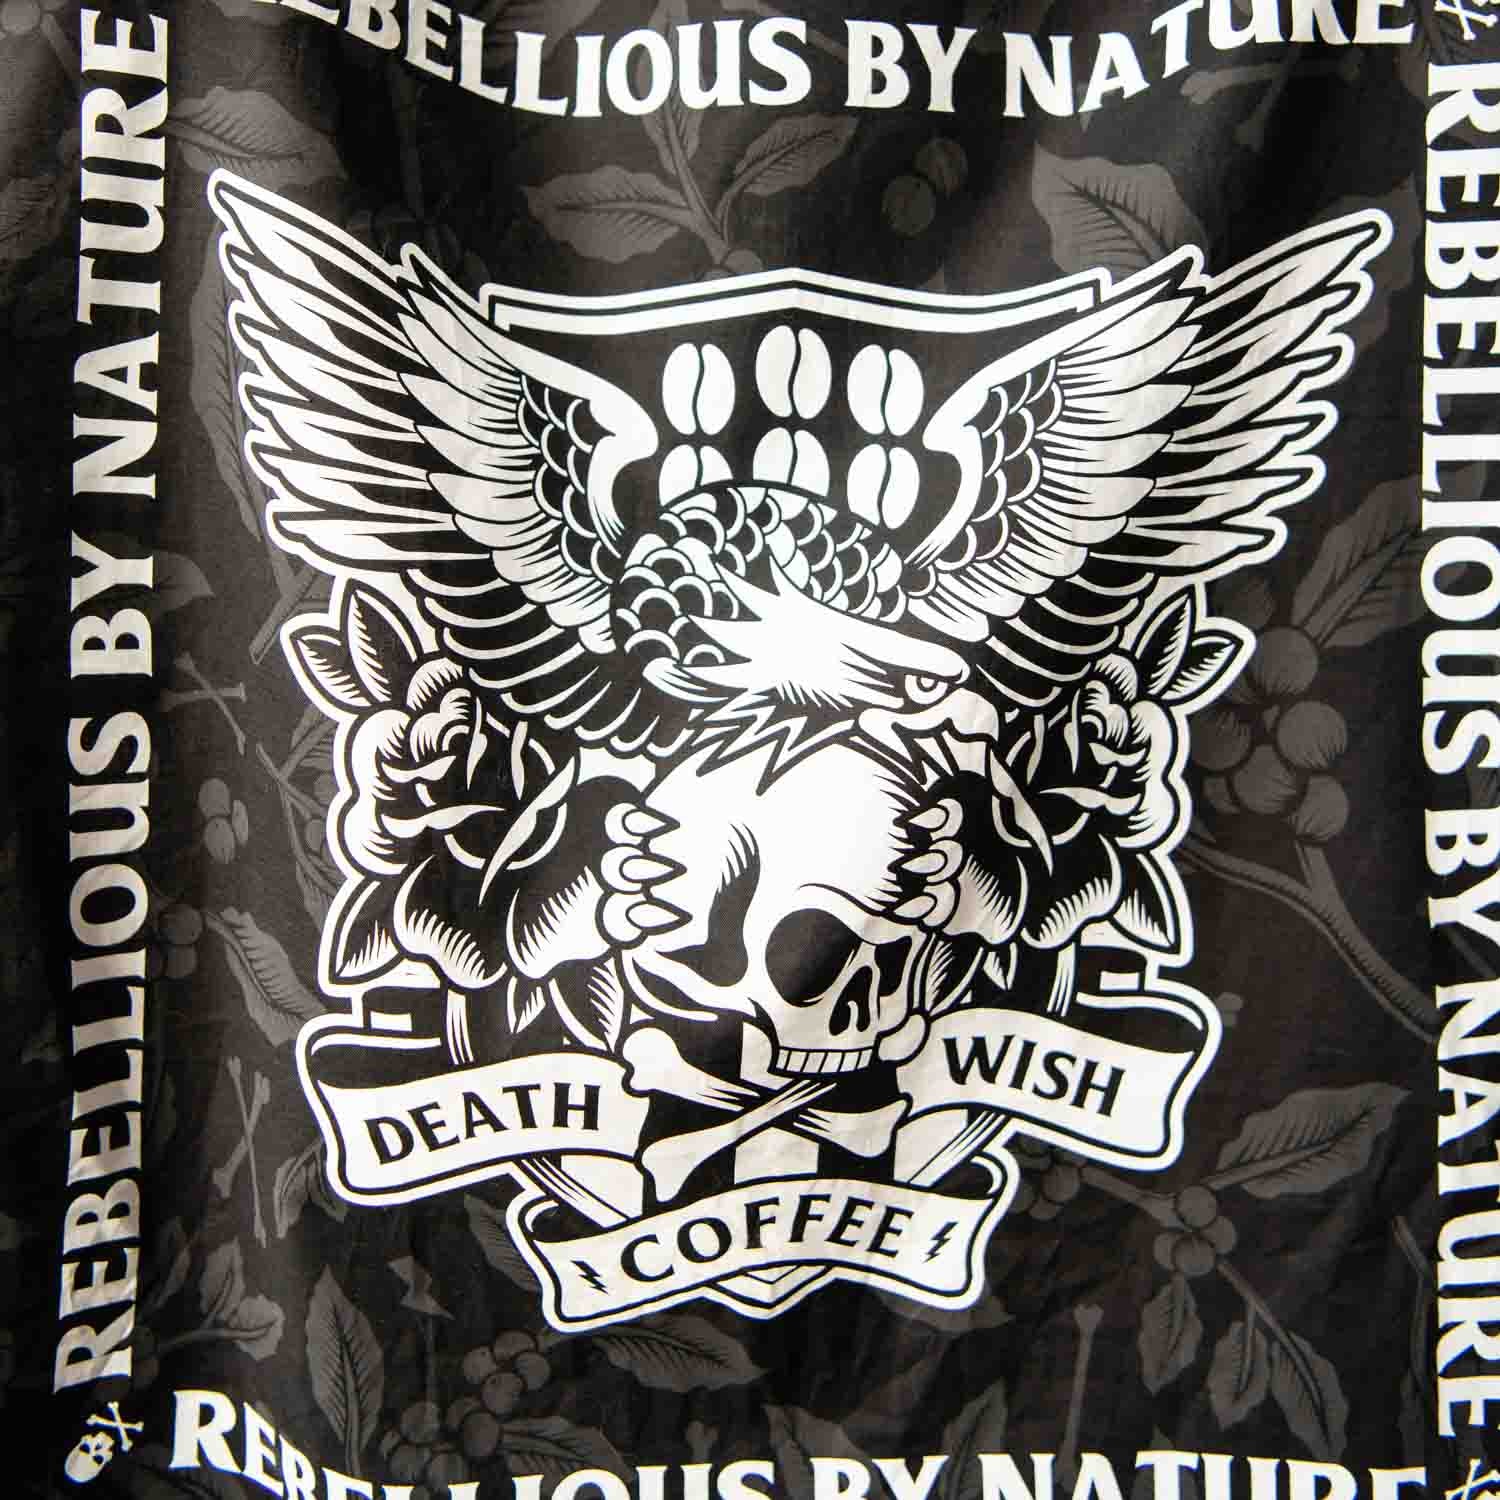 Death Wish Coffee Eagle Crest Rebellious by Nature Bandana - Close Up